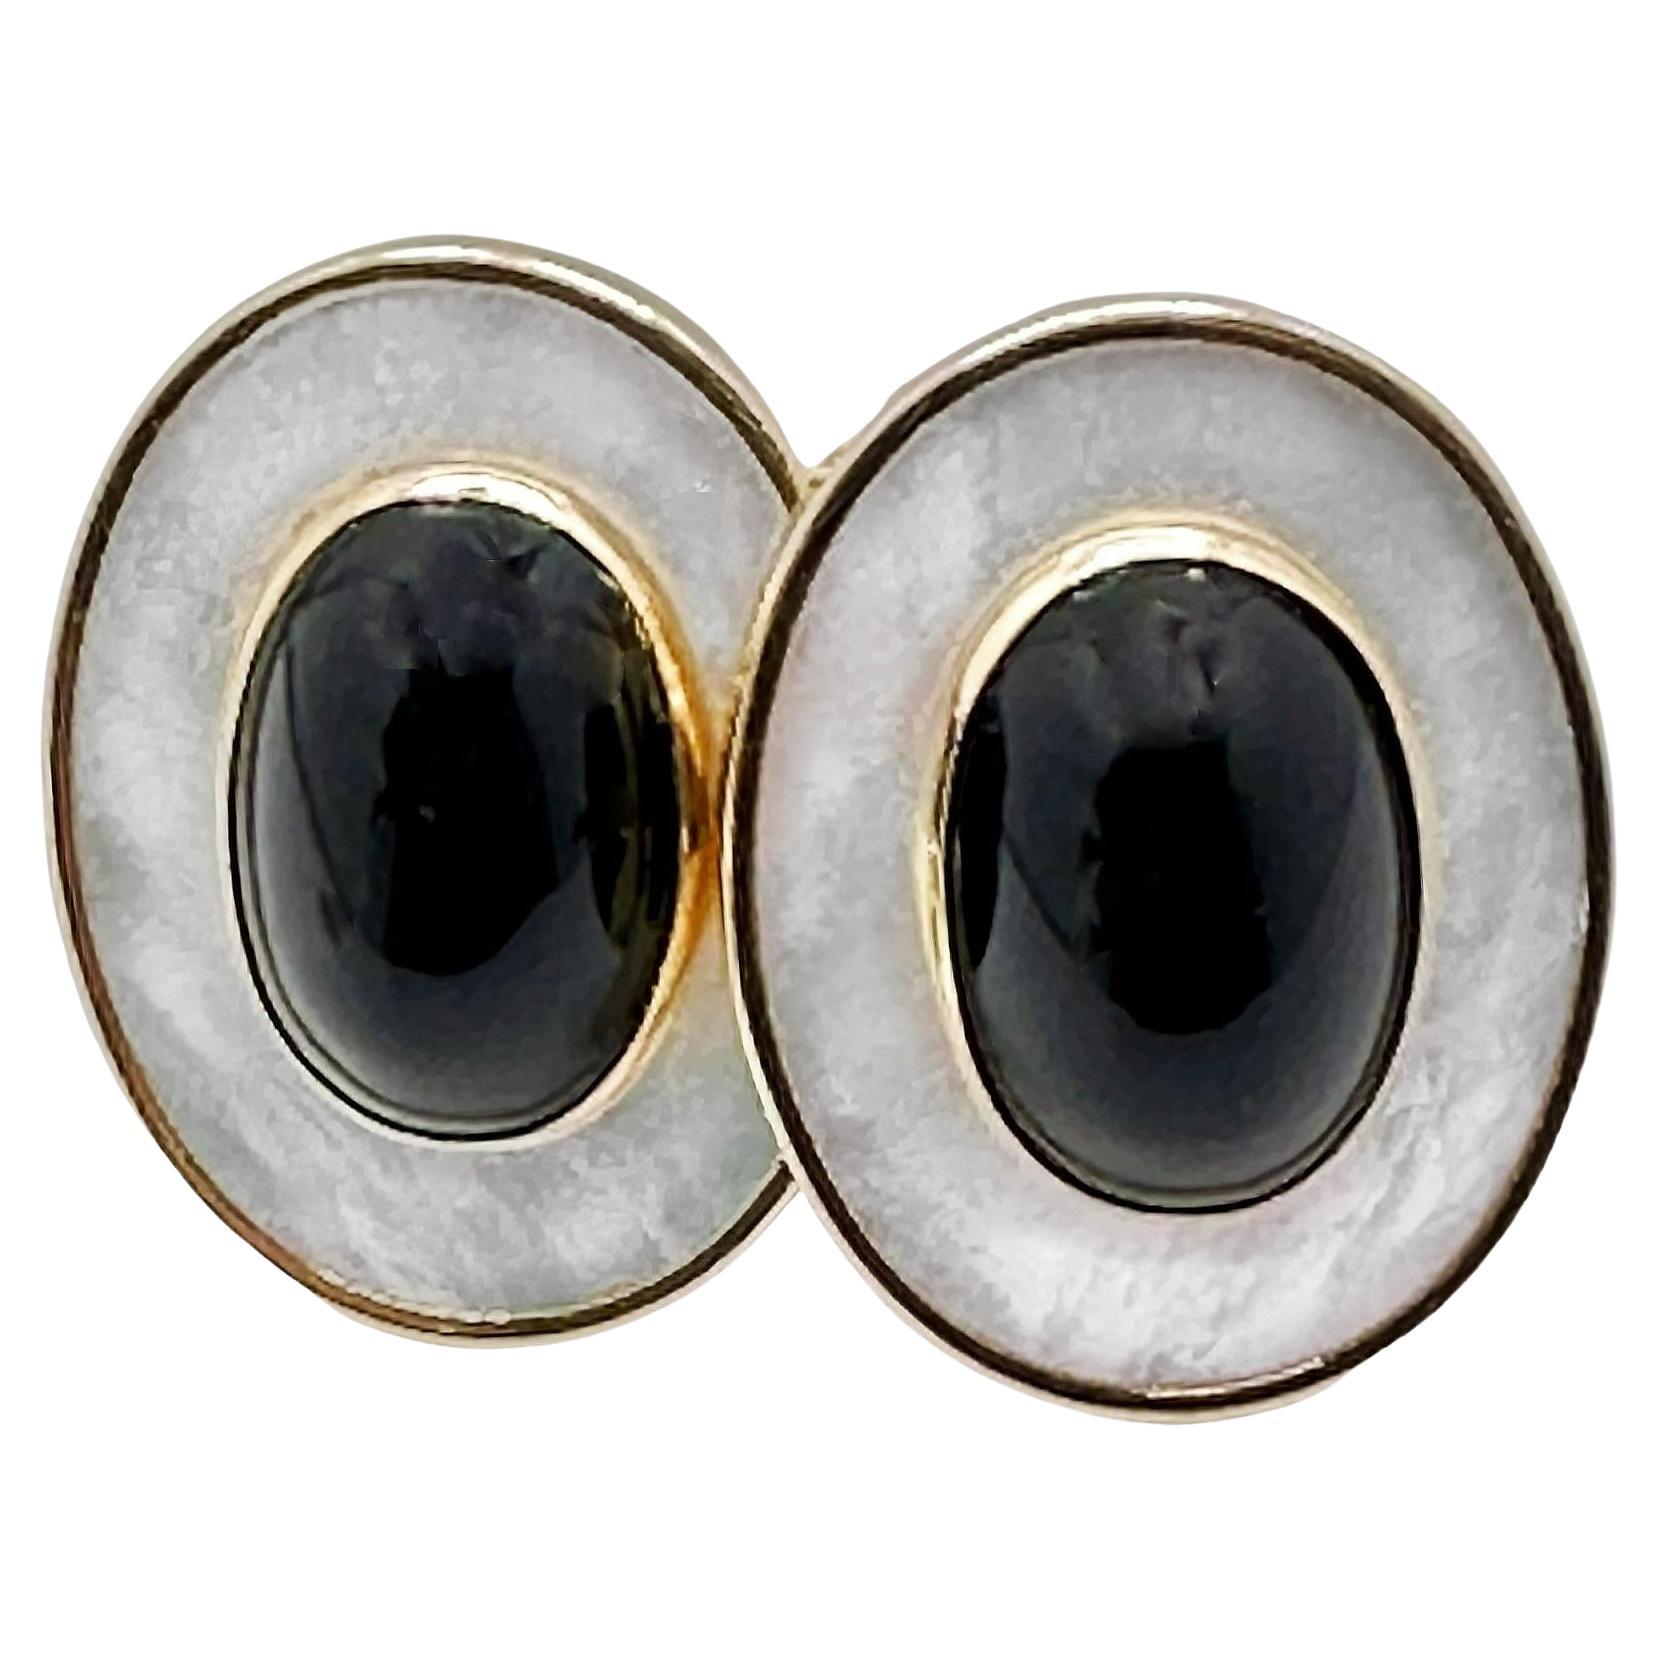 Gold, Mother of Pearl, and Onyx, Oval Shaped Earrings by Peter Brams Designs